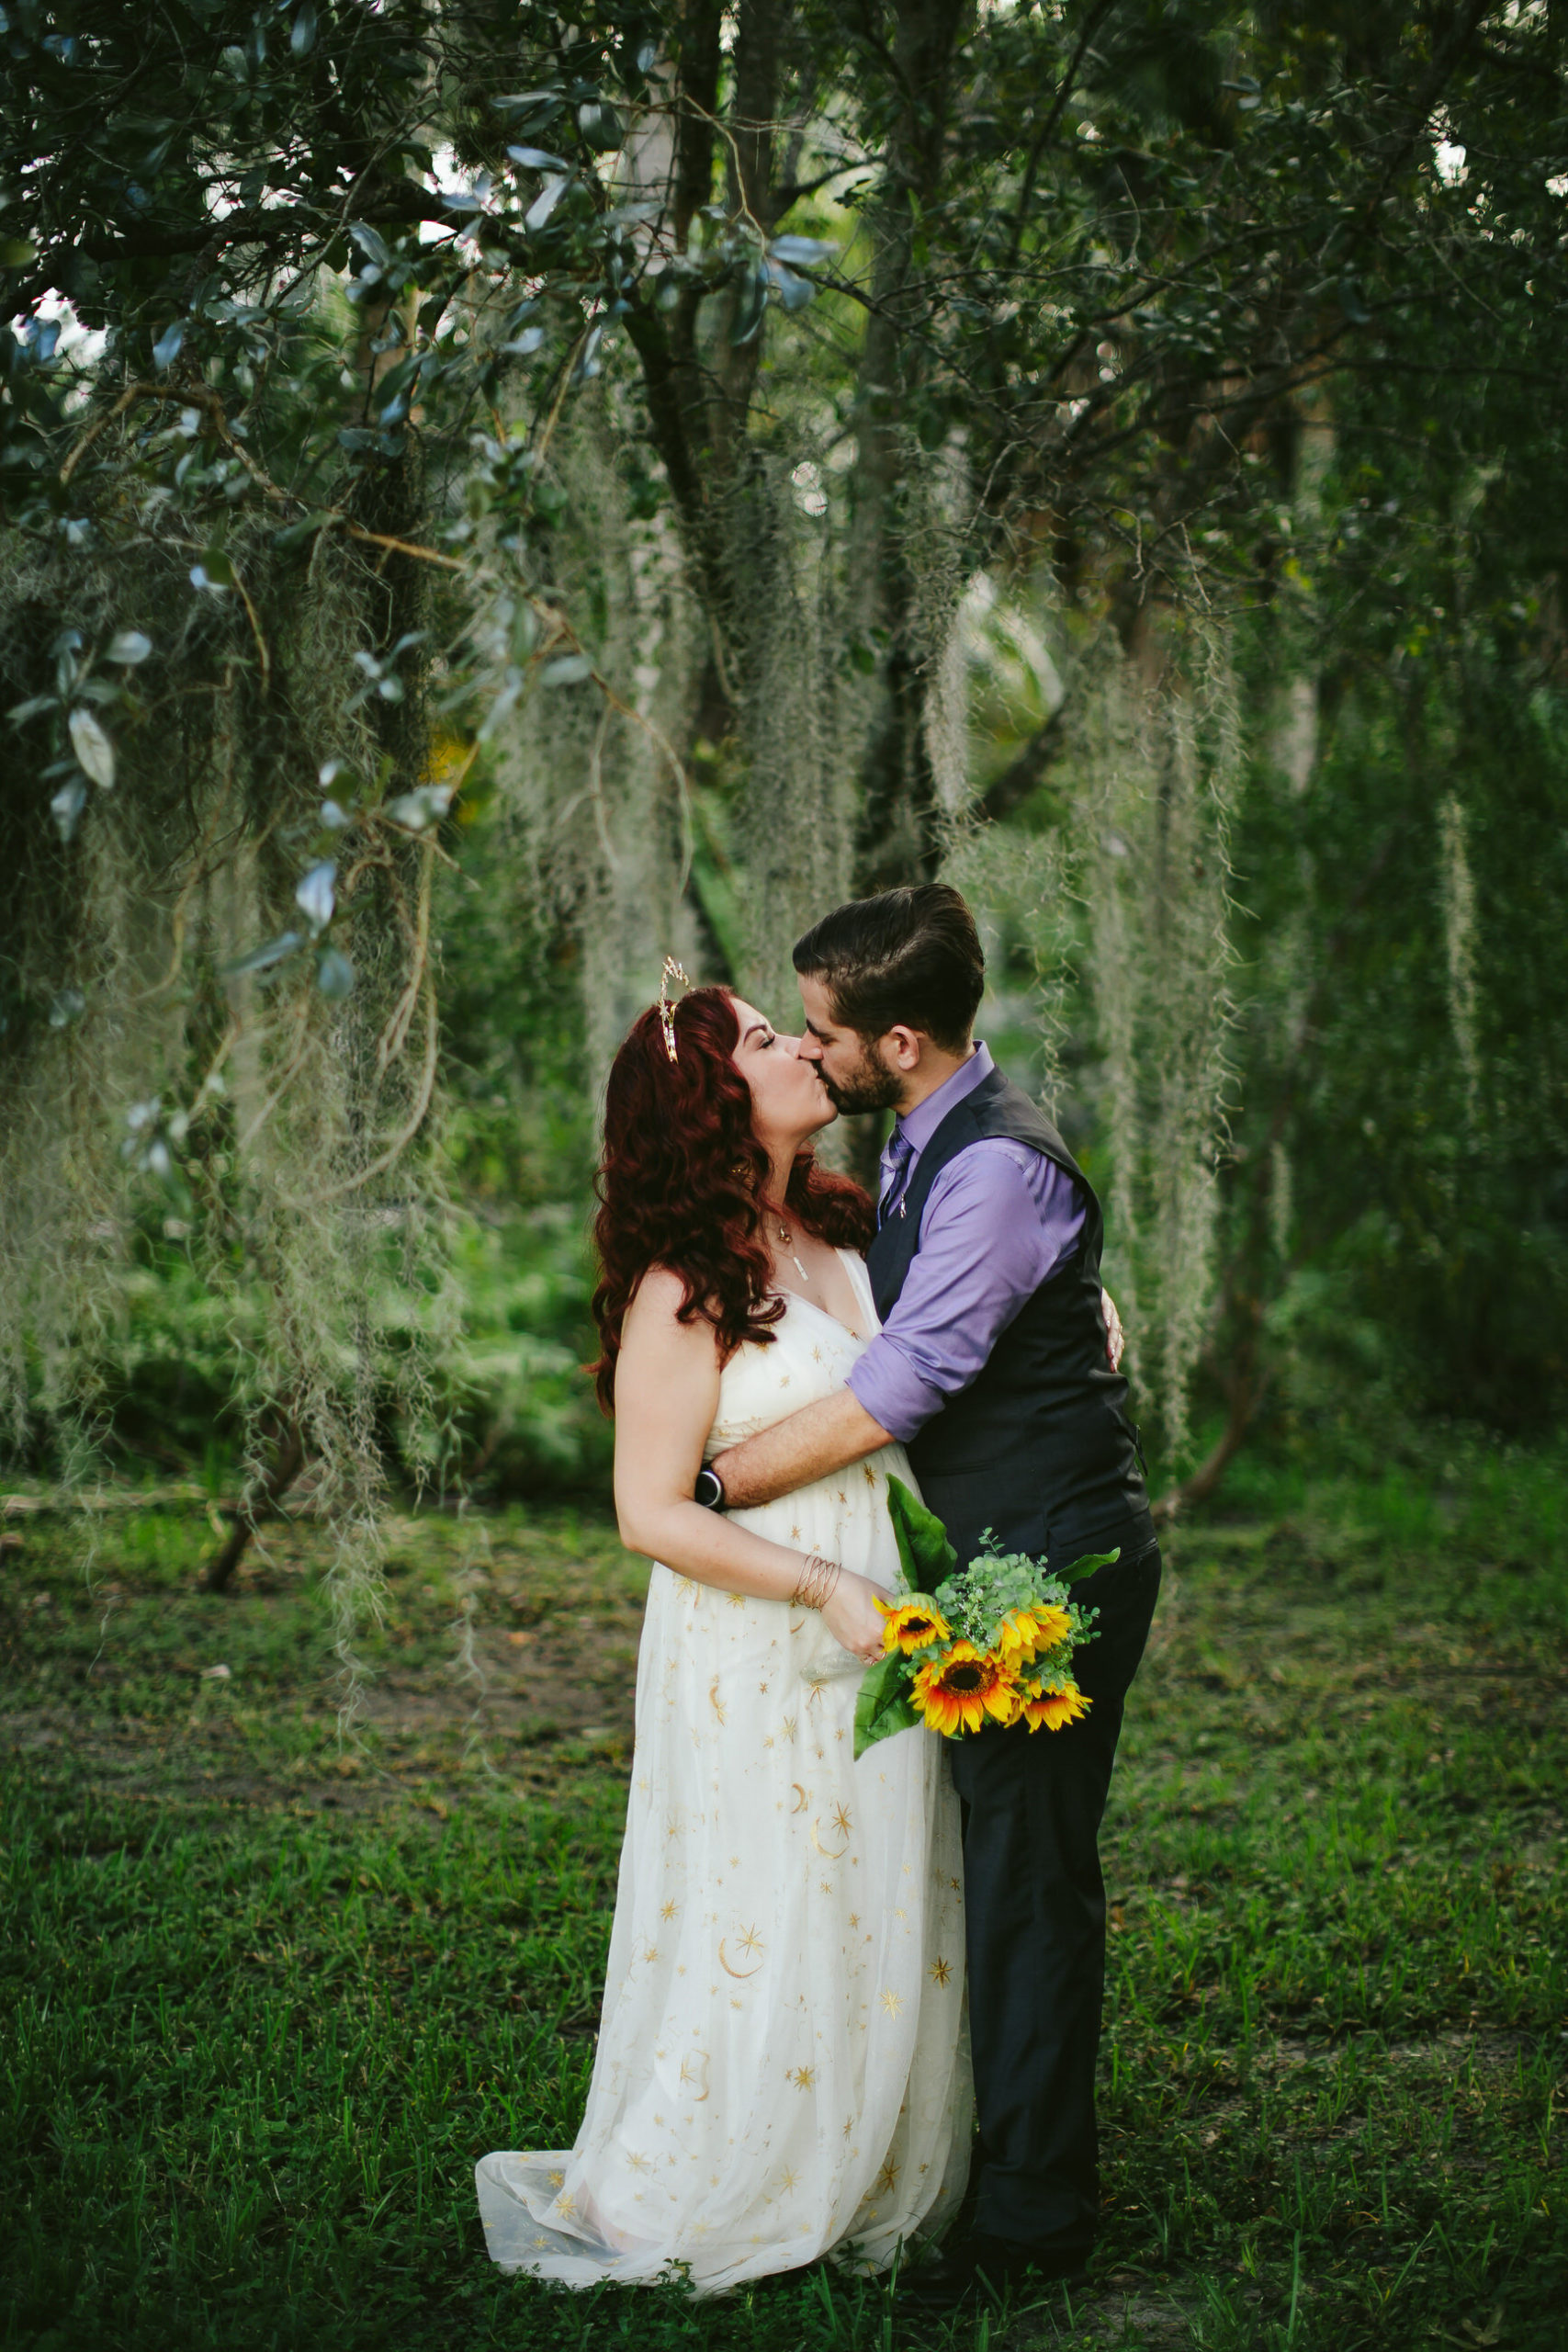 Witchy-Wedding-Portraits-Elopement-South-Florida-Sunflowers-Nature